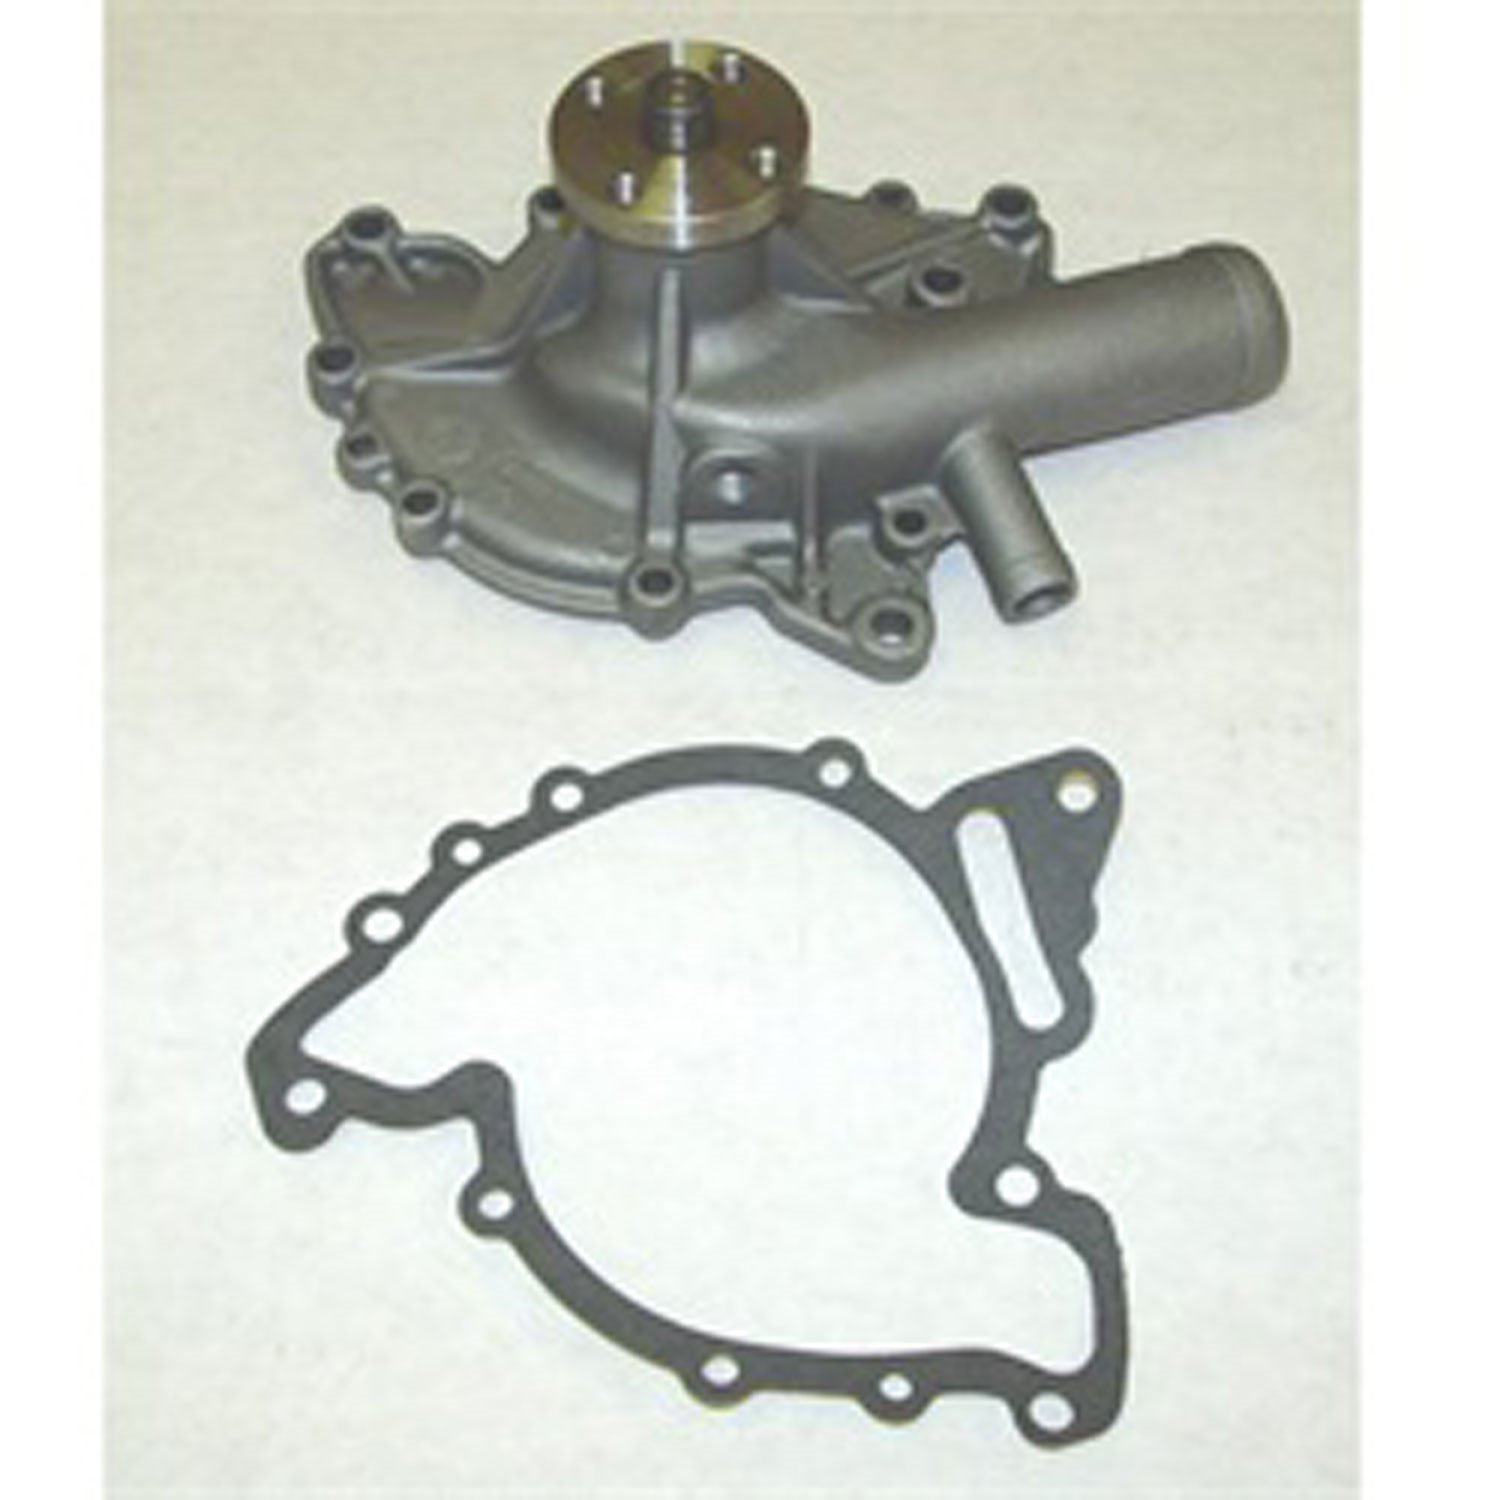 Replacement water pump from Omix-ADA, Fits 66-71 Jeep CJ5 and CJ6 with a 225 cubic inch engine.